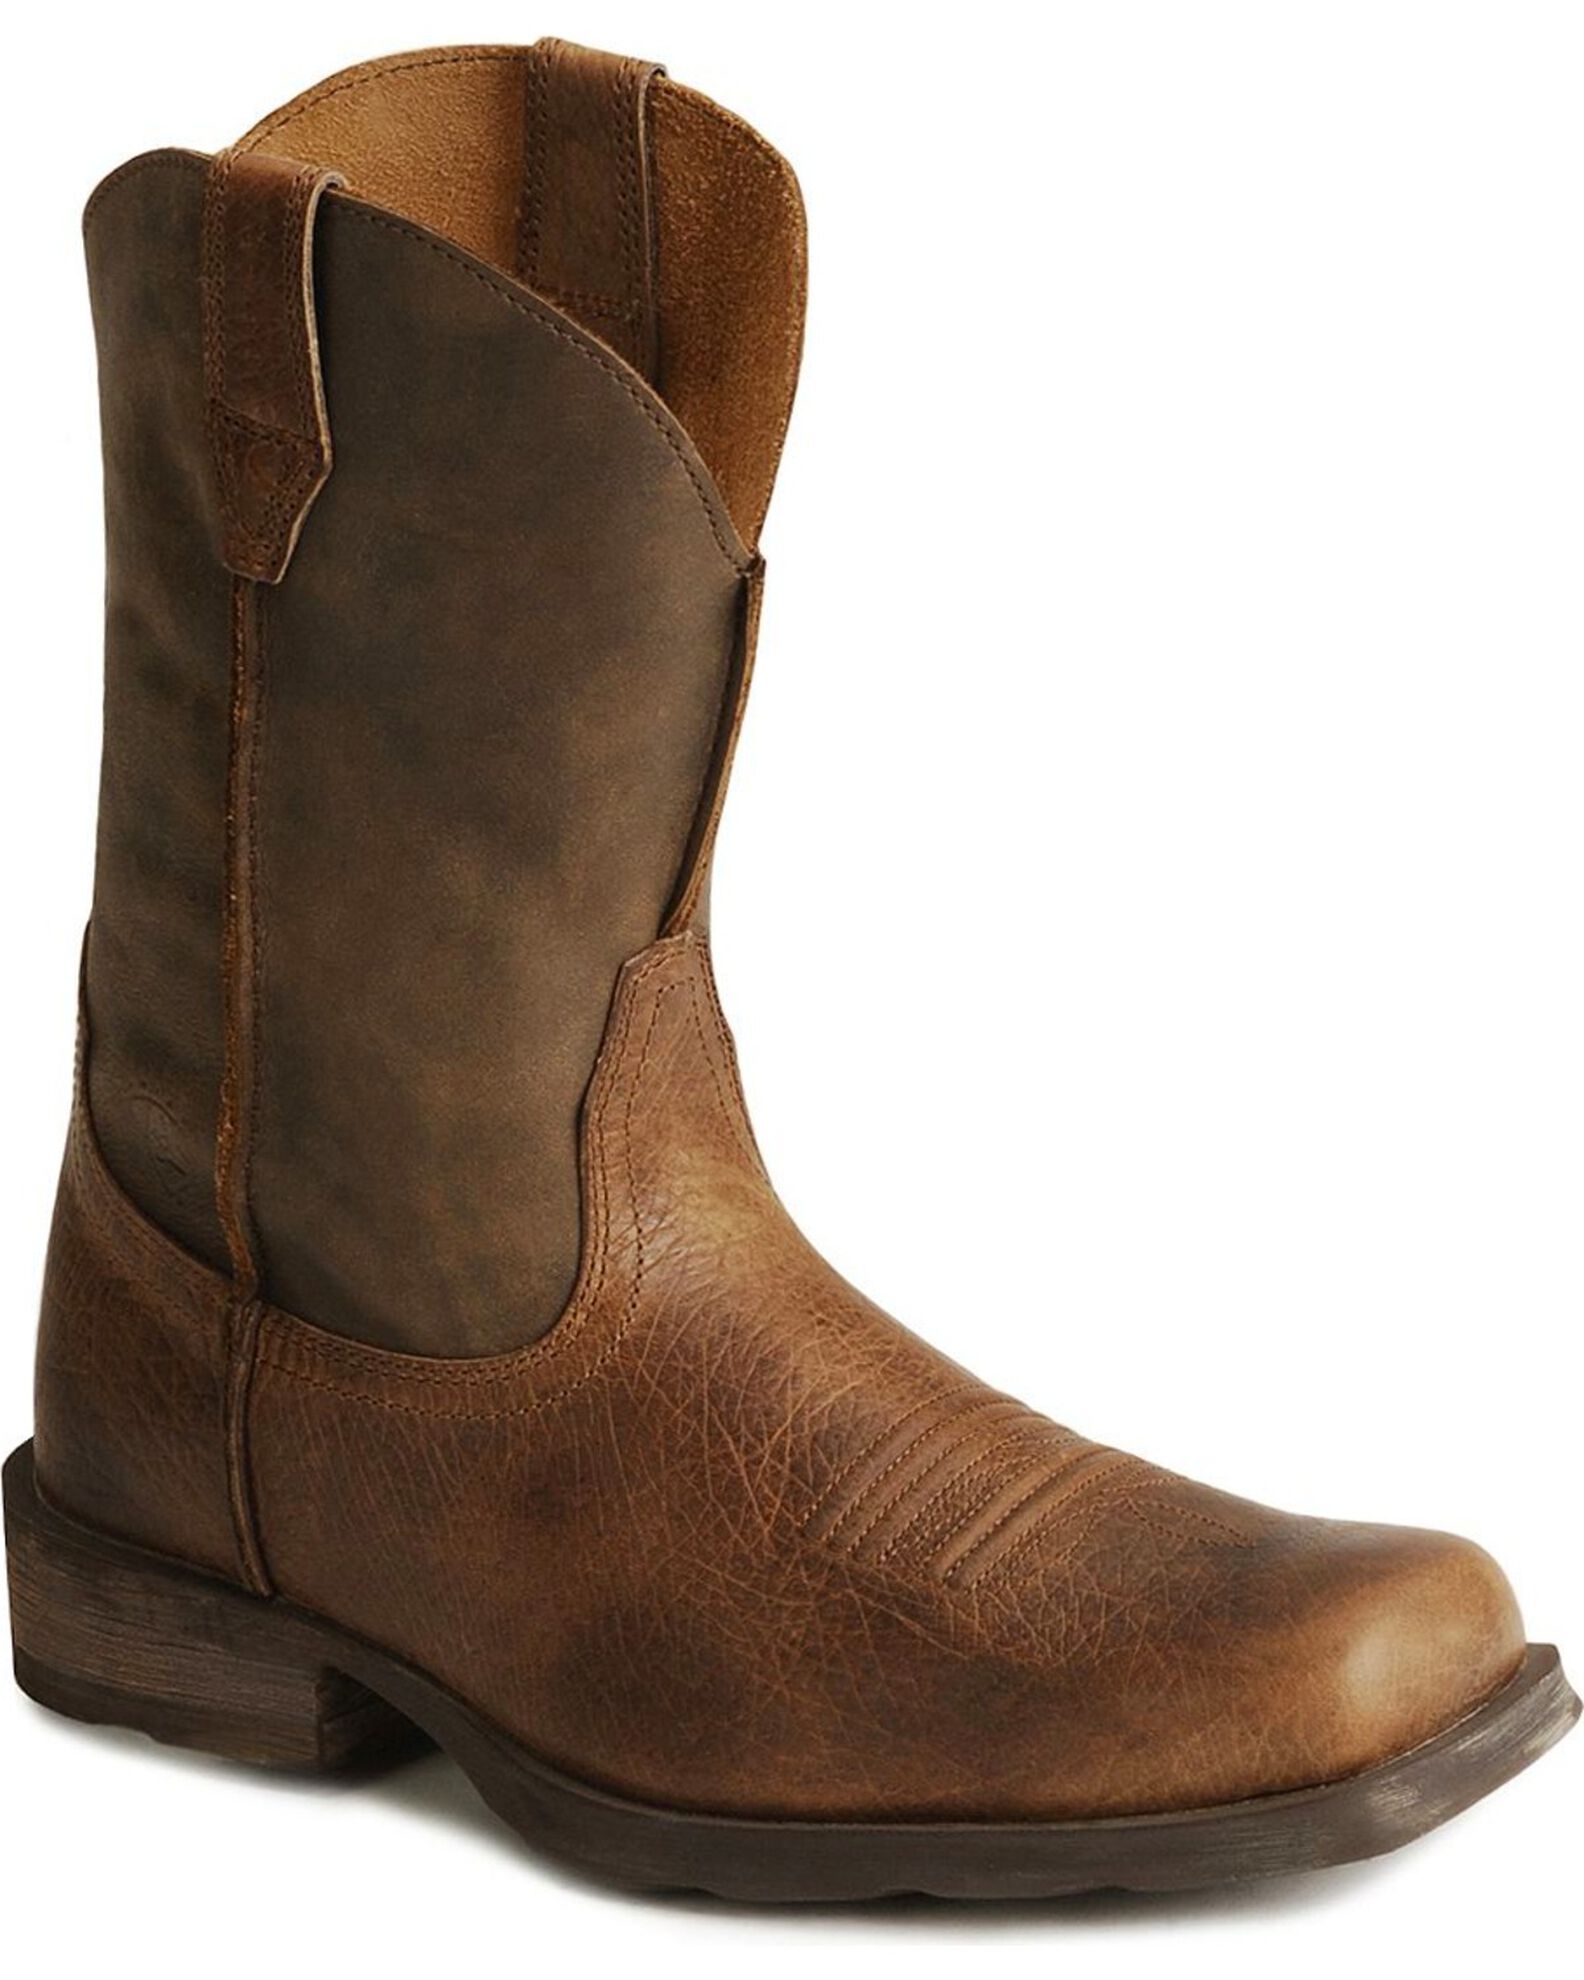 What Stores Sell Ariat Men's Boots?